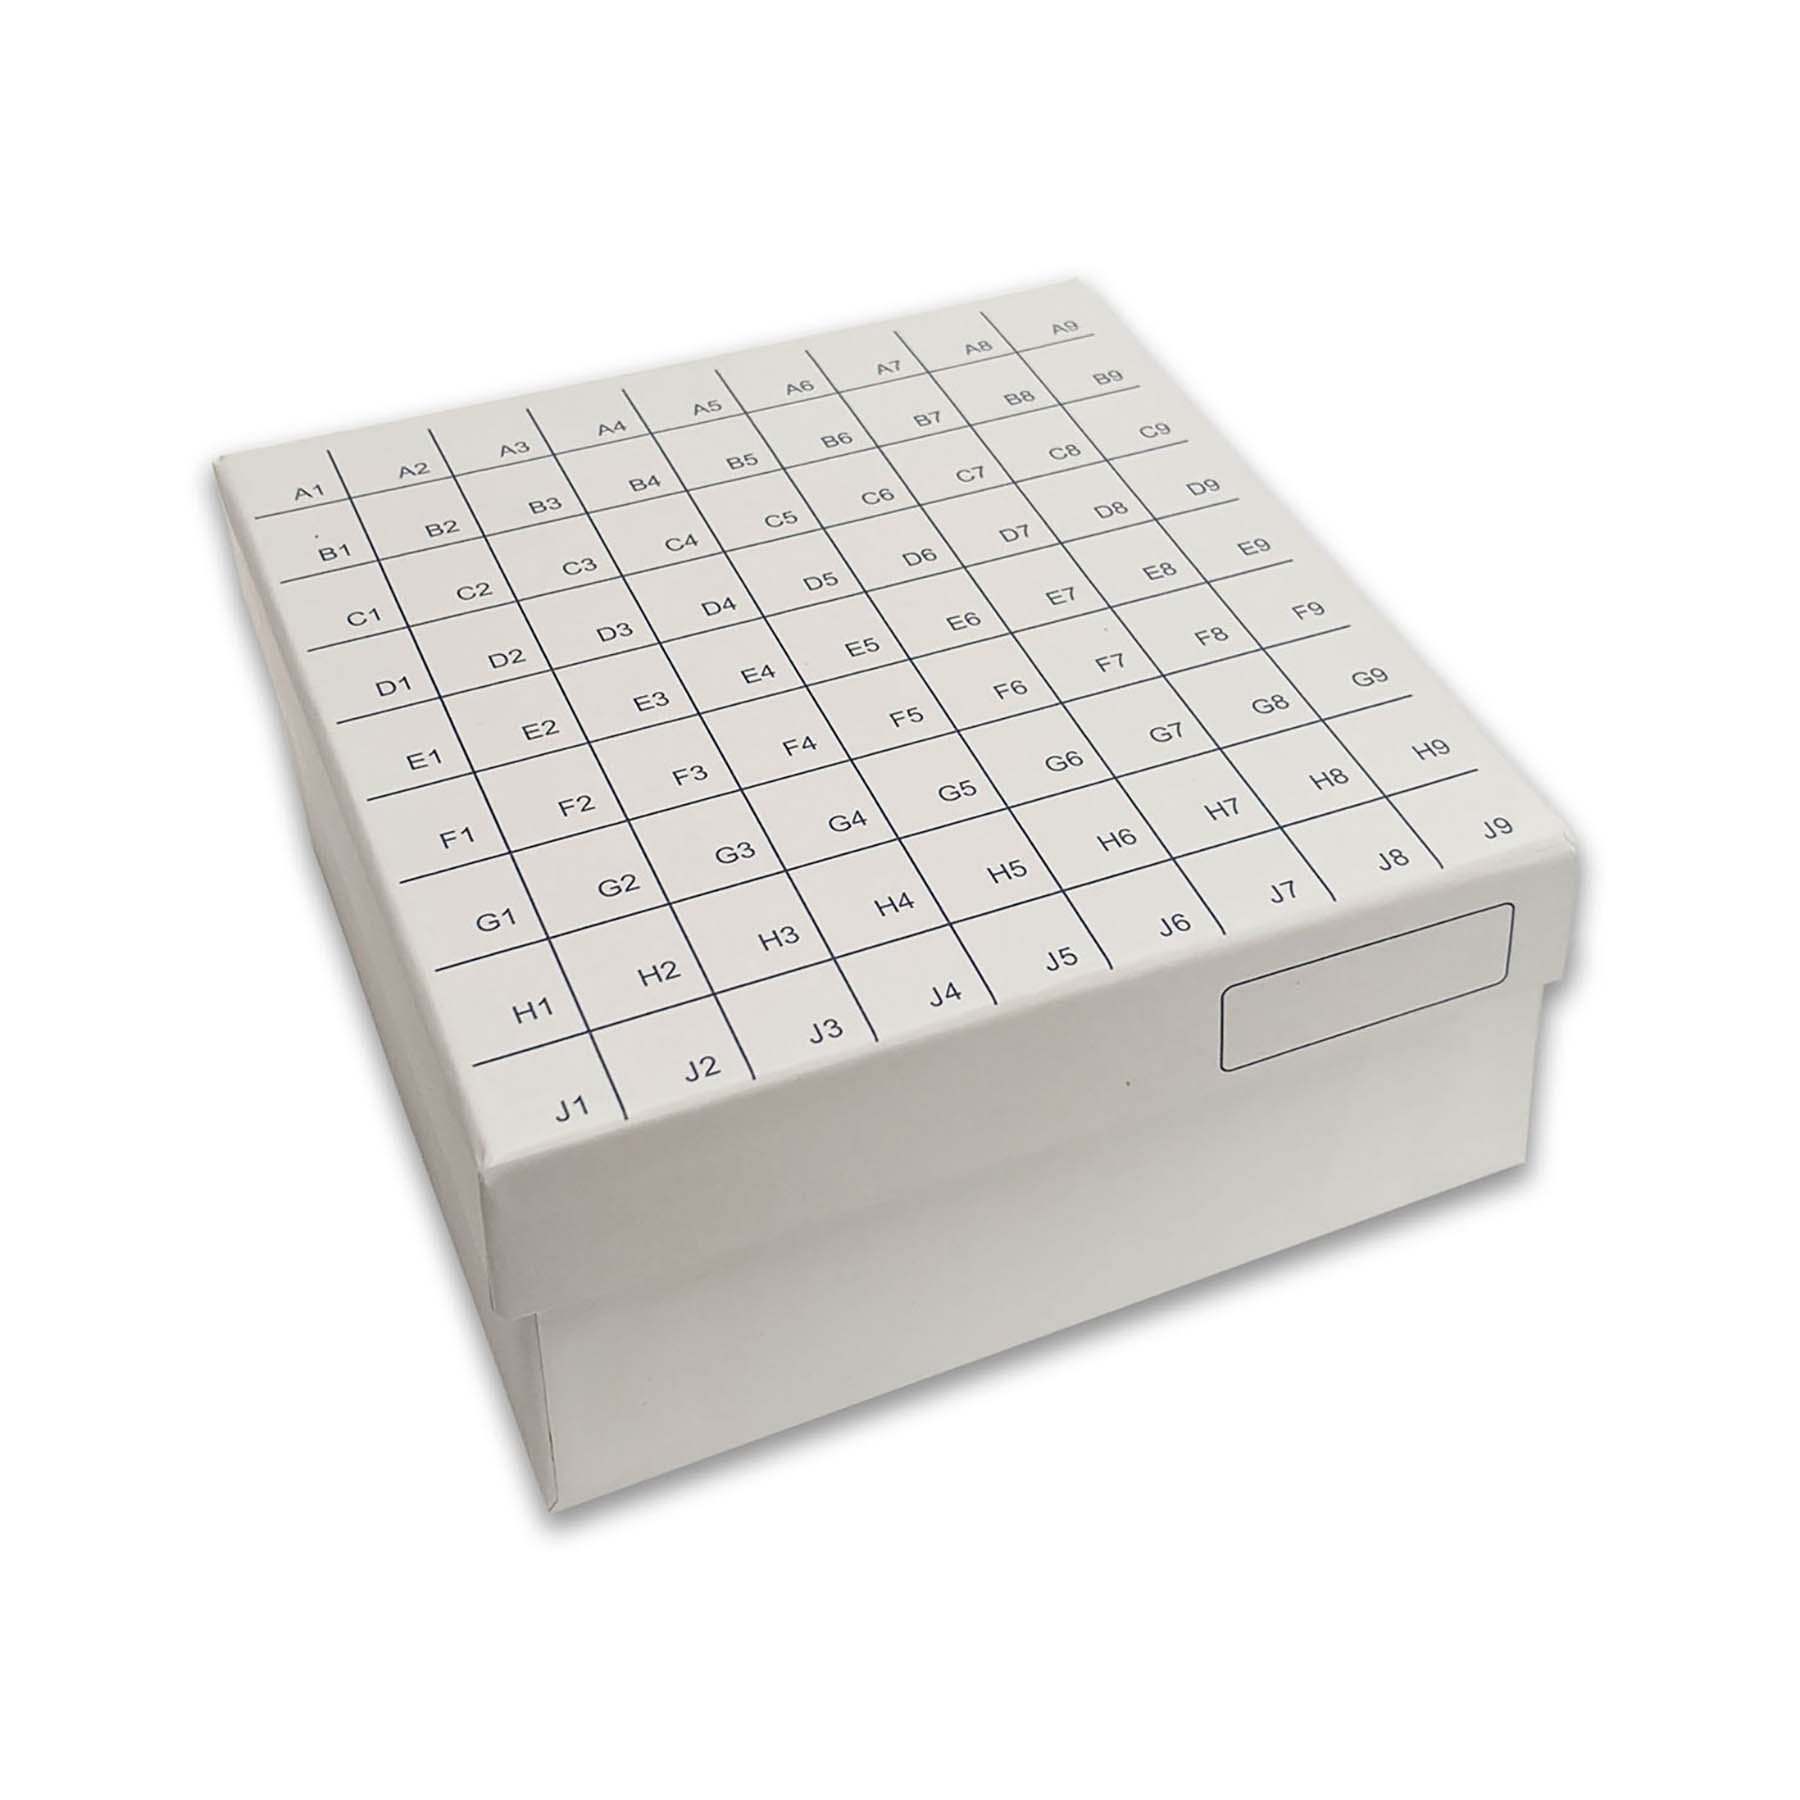 https://www.universalmedicalinc.com/media/catalog/product/cache/db2290e14b239ecd227b001e50a6dc1b/r/3/r3781_3-inch-fliptop-cardboard-freezer-box-81-place-with-attached-hinged-lid-white.jpg